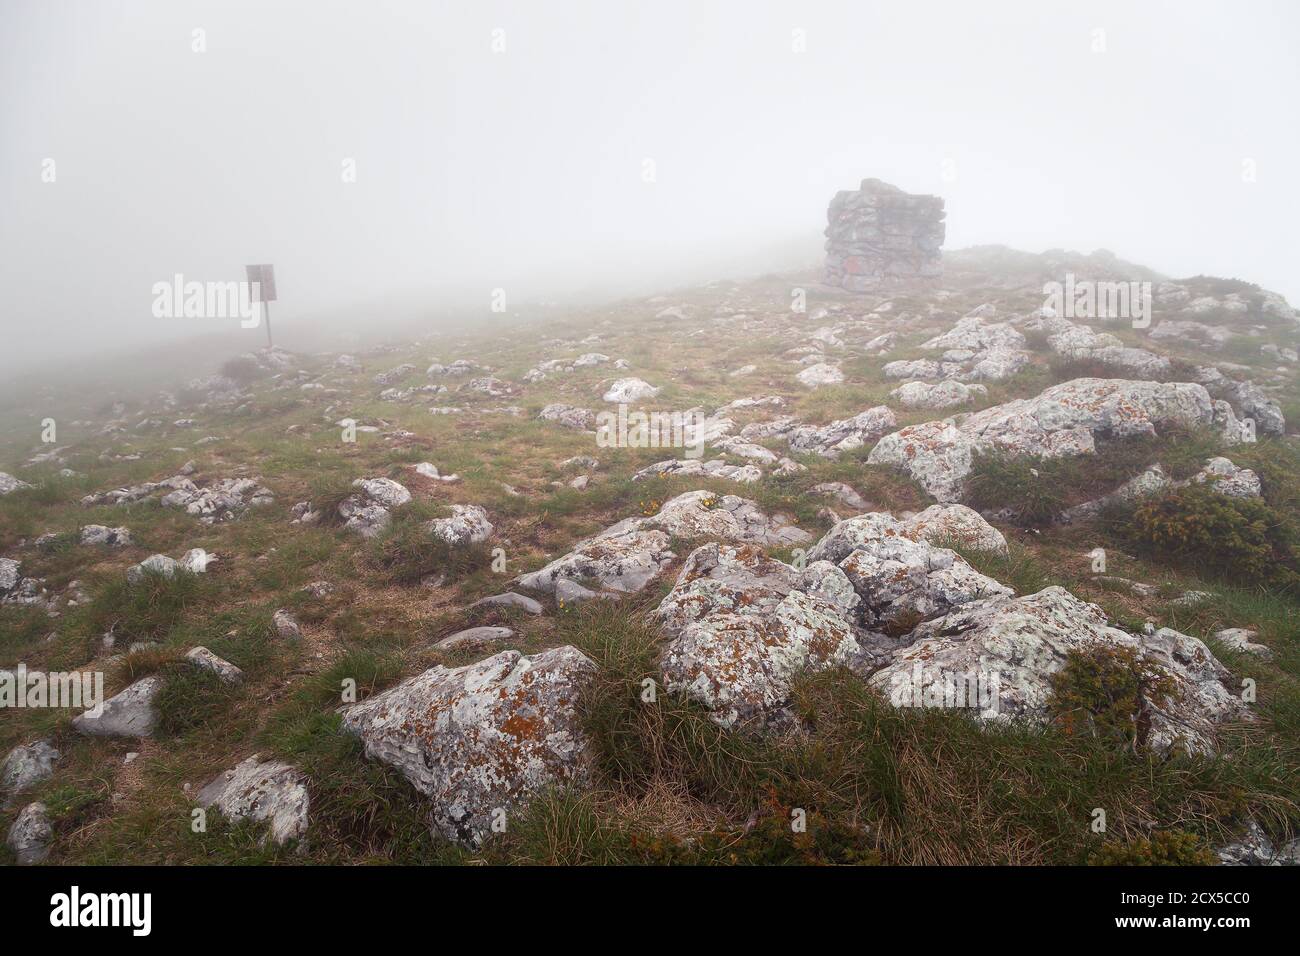 Foggy view of Trem summit stone and sign on Dry mountain (Suva planina) on a misty, wet, moody morning Stock Photo